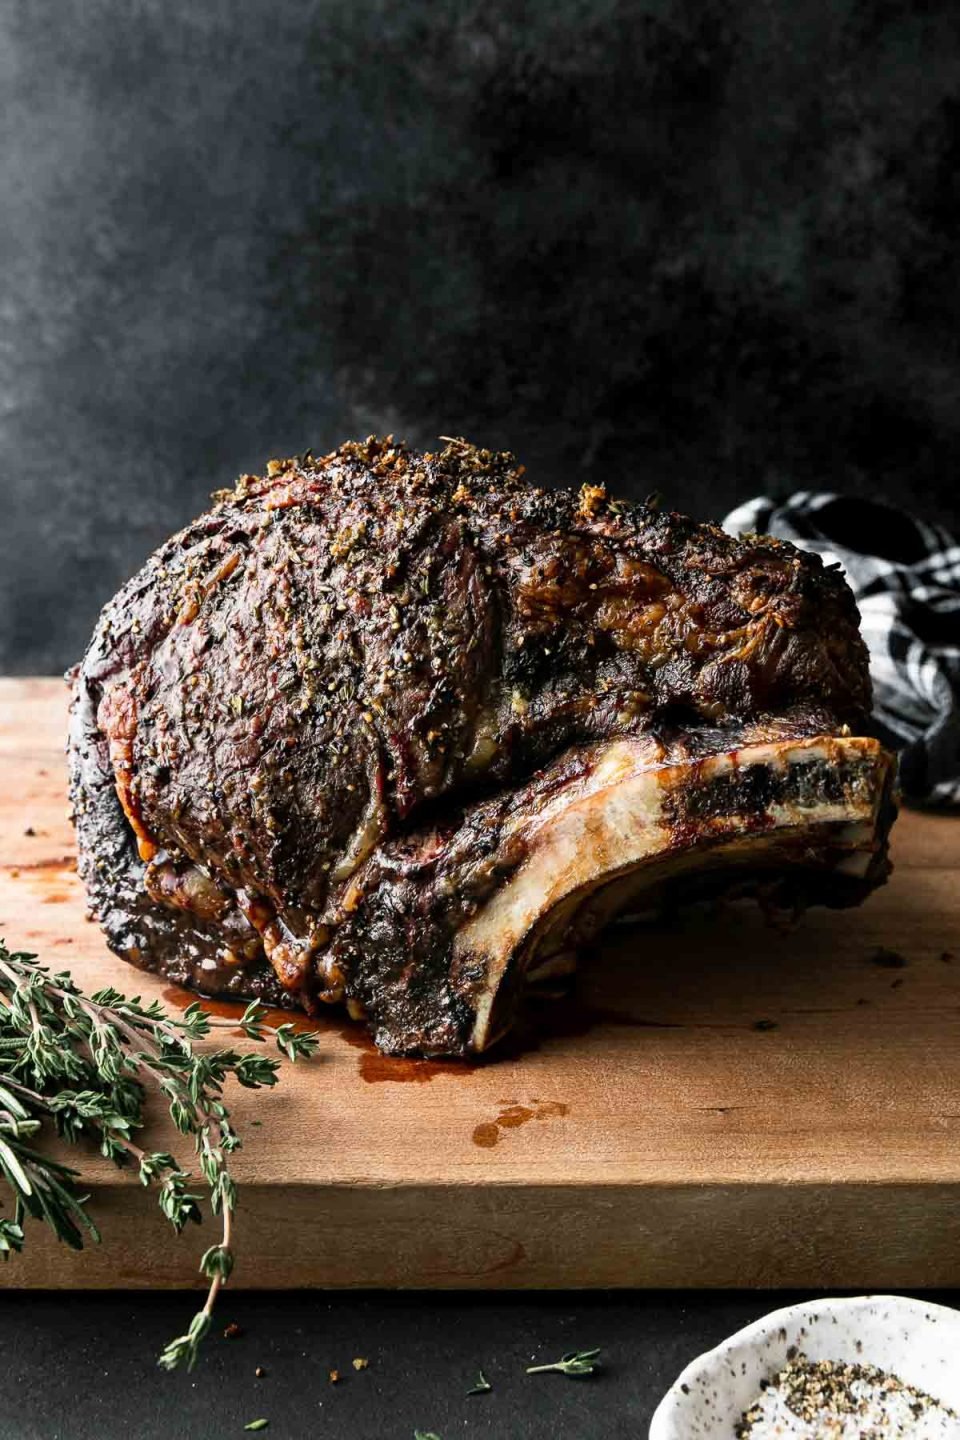 A side angle shot of roasted Prime Rib covered in a Garlic Herb Rub sitting atop a wooden cutting board. The cutting board rests atop a dark textured surface with a black and white plaid linen napkin resting in the background & fresh herbs, and a pinch bowl filled with kosher salt and black pepper in the foreground. The items are set against a dark textured background.